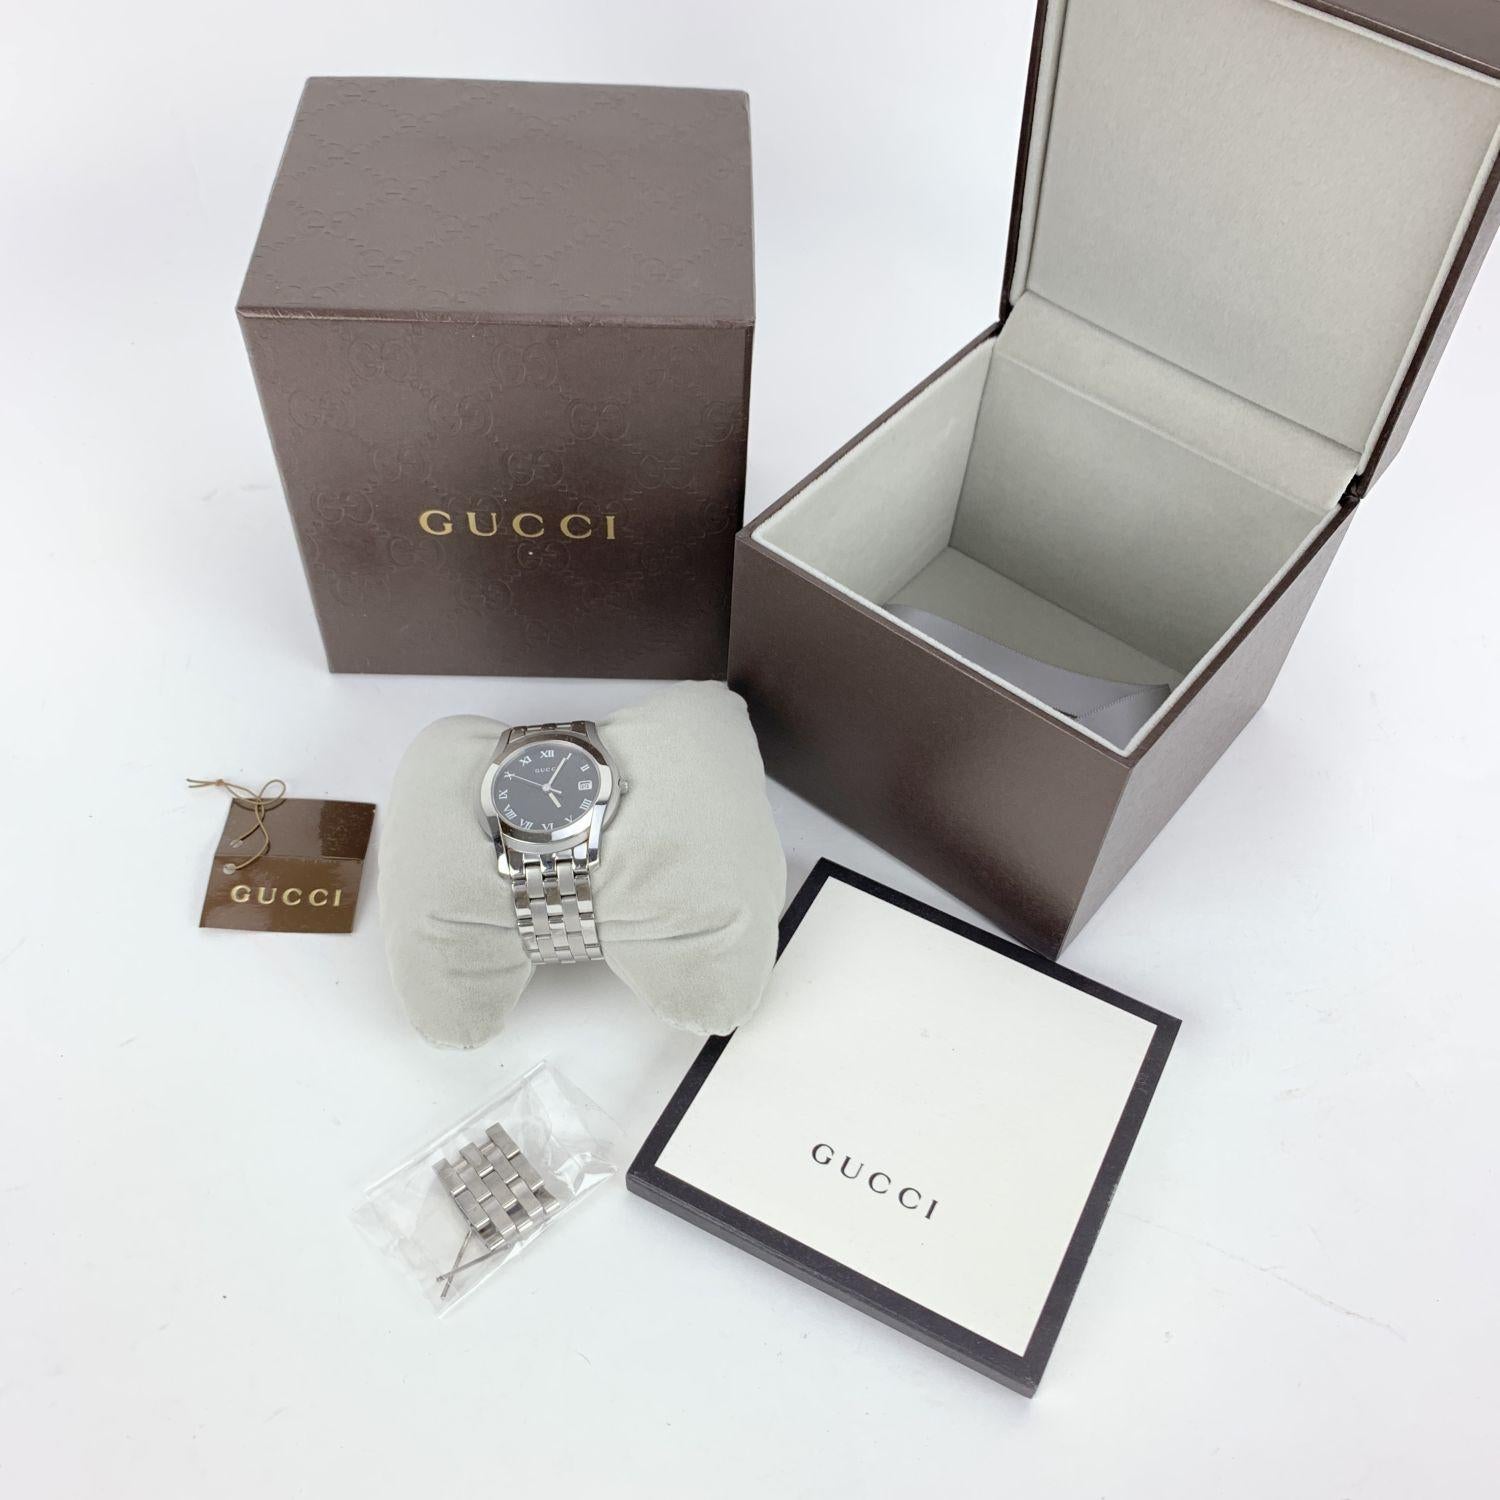 Gucci silver tone stainless steel wrist watch, mod. 5500 M. Black Dial. Date at 3 o'clock. Sapphire crystal. Swiss Made Quartz movement. Gucci written on face. Roman numbers. Gucci crest on the reverse of the case. Water Resistant to 3atm. Stainless